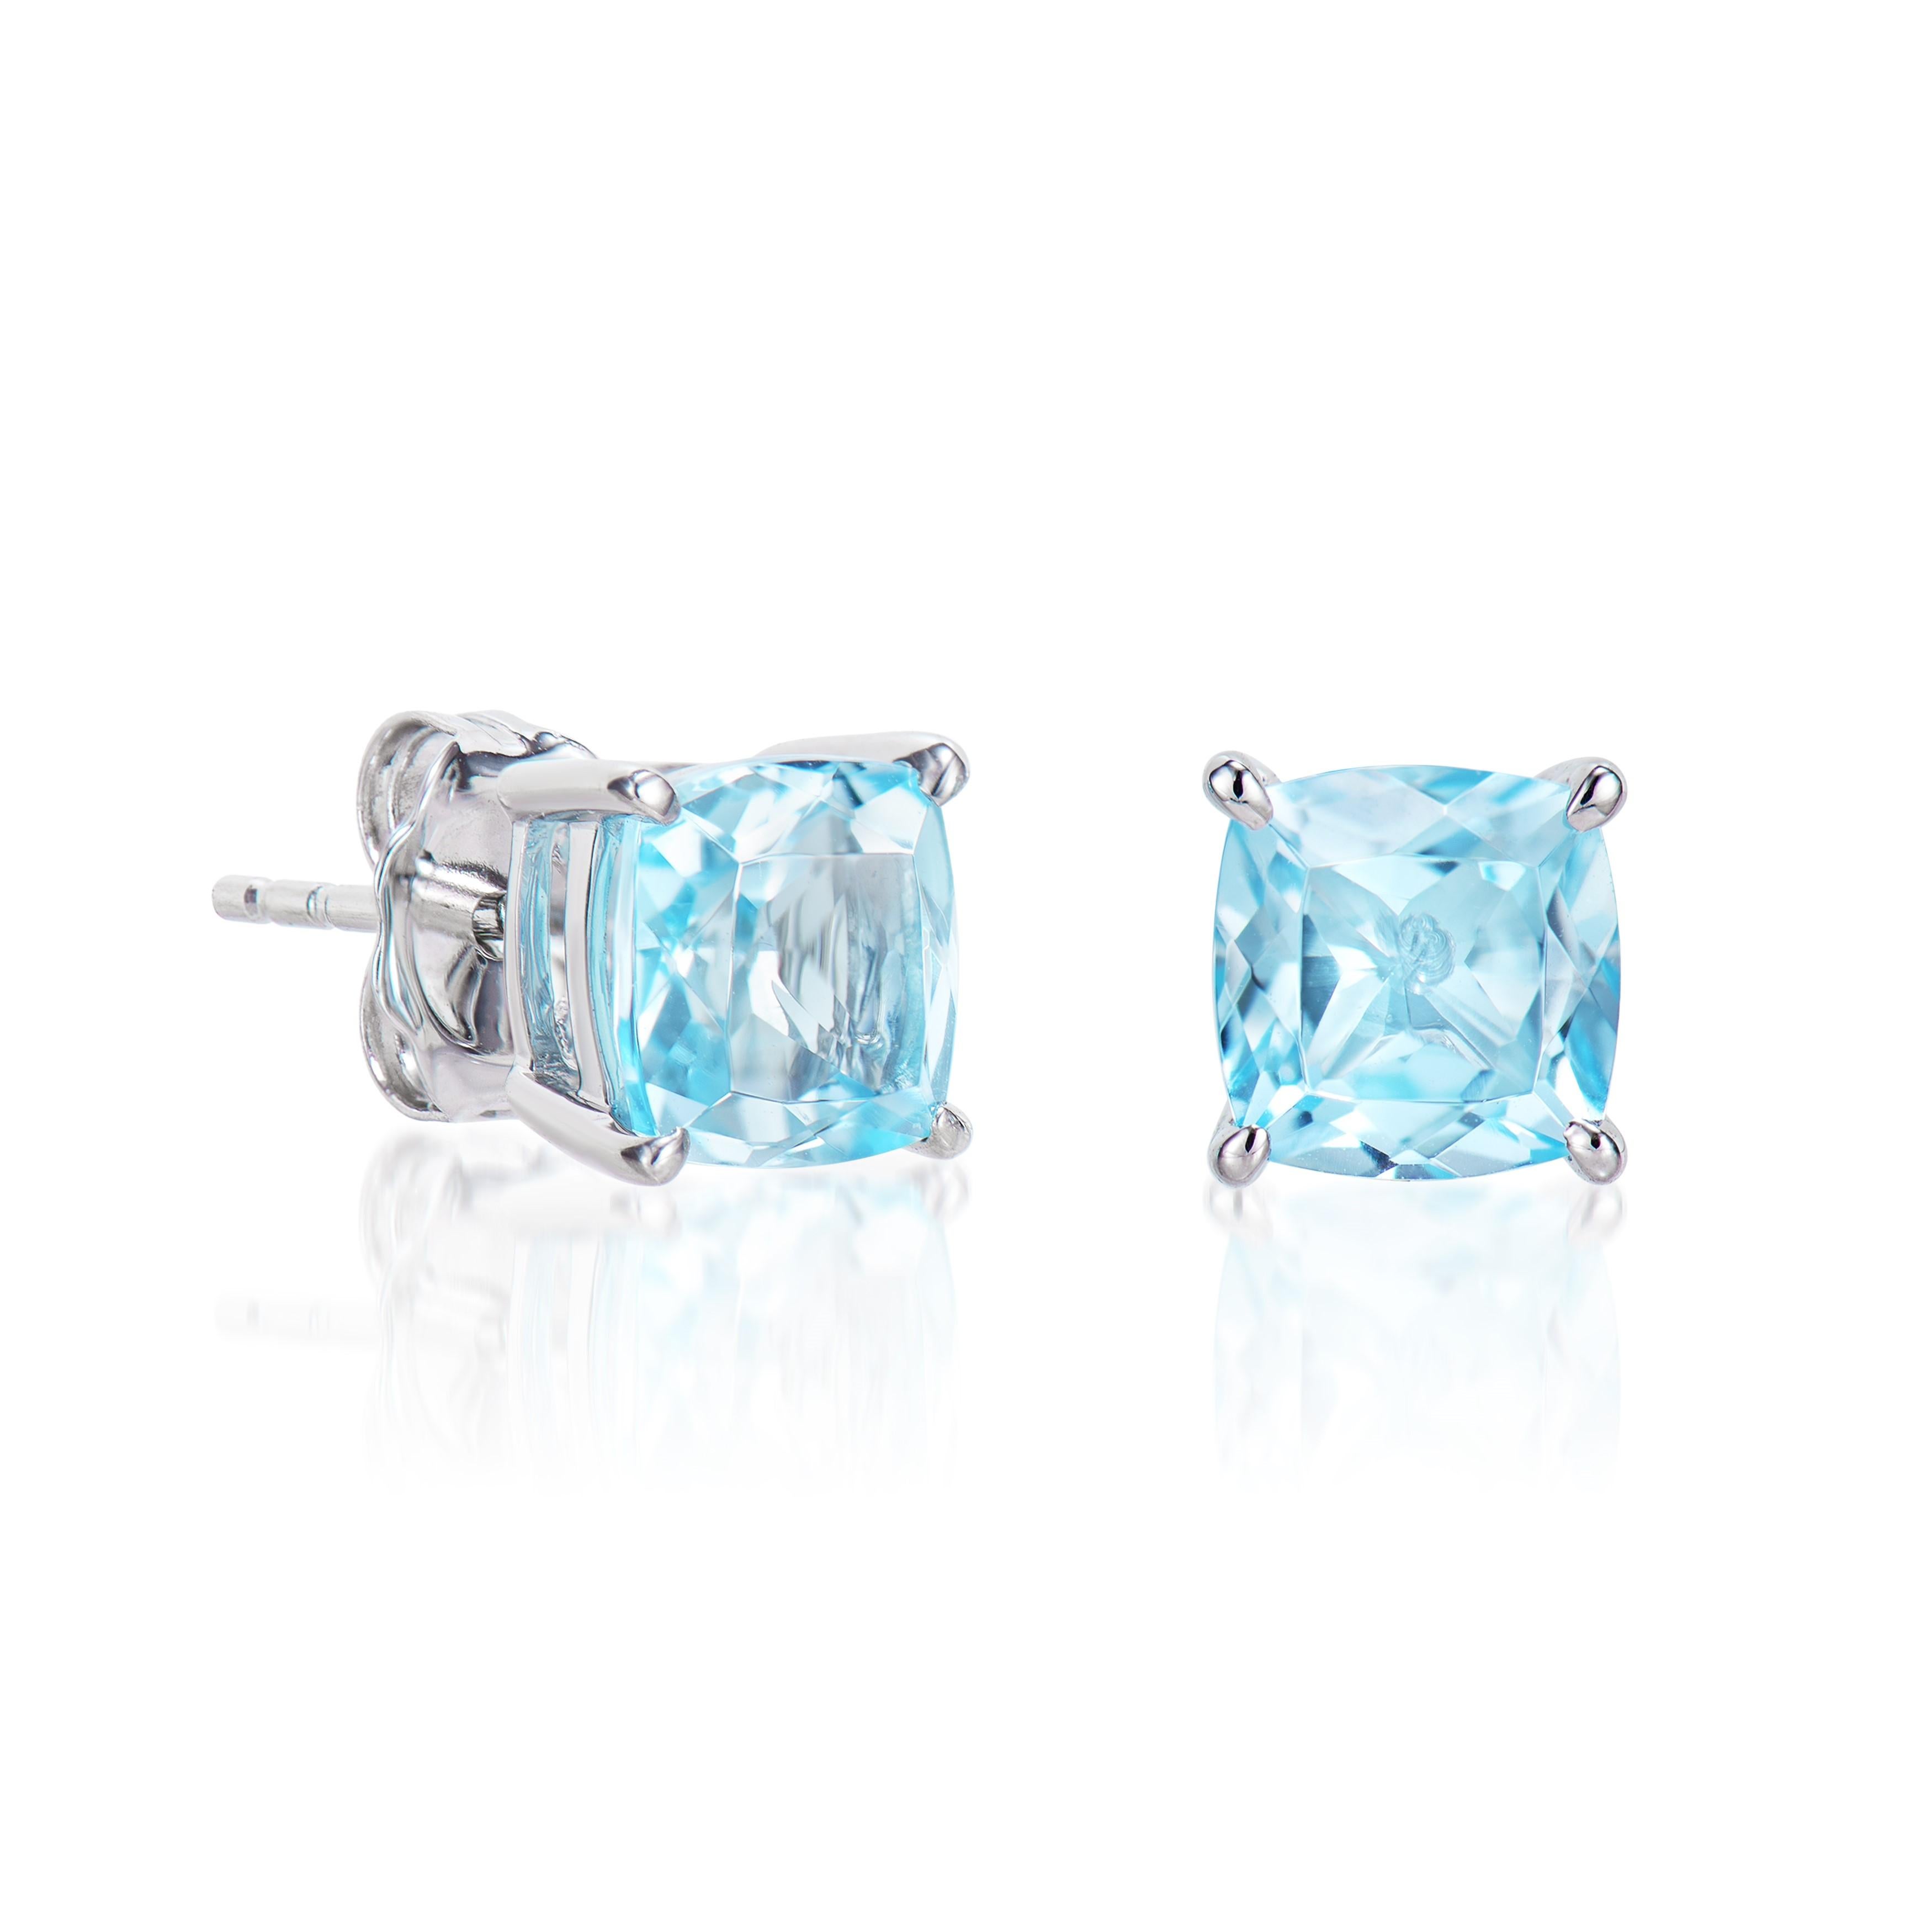 Presented A lovely collection of gems, including Amethyst, Sky Blue Topaz and Swiss Blue Topaz is perfect for people who value quality and want to wear it to any occasion or celebration. The white gold Sky blue topaz Stud Earrings offer a classic